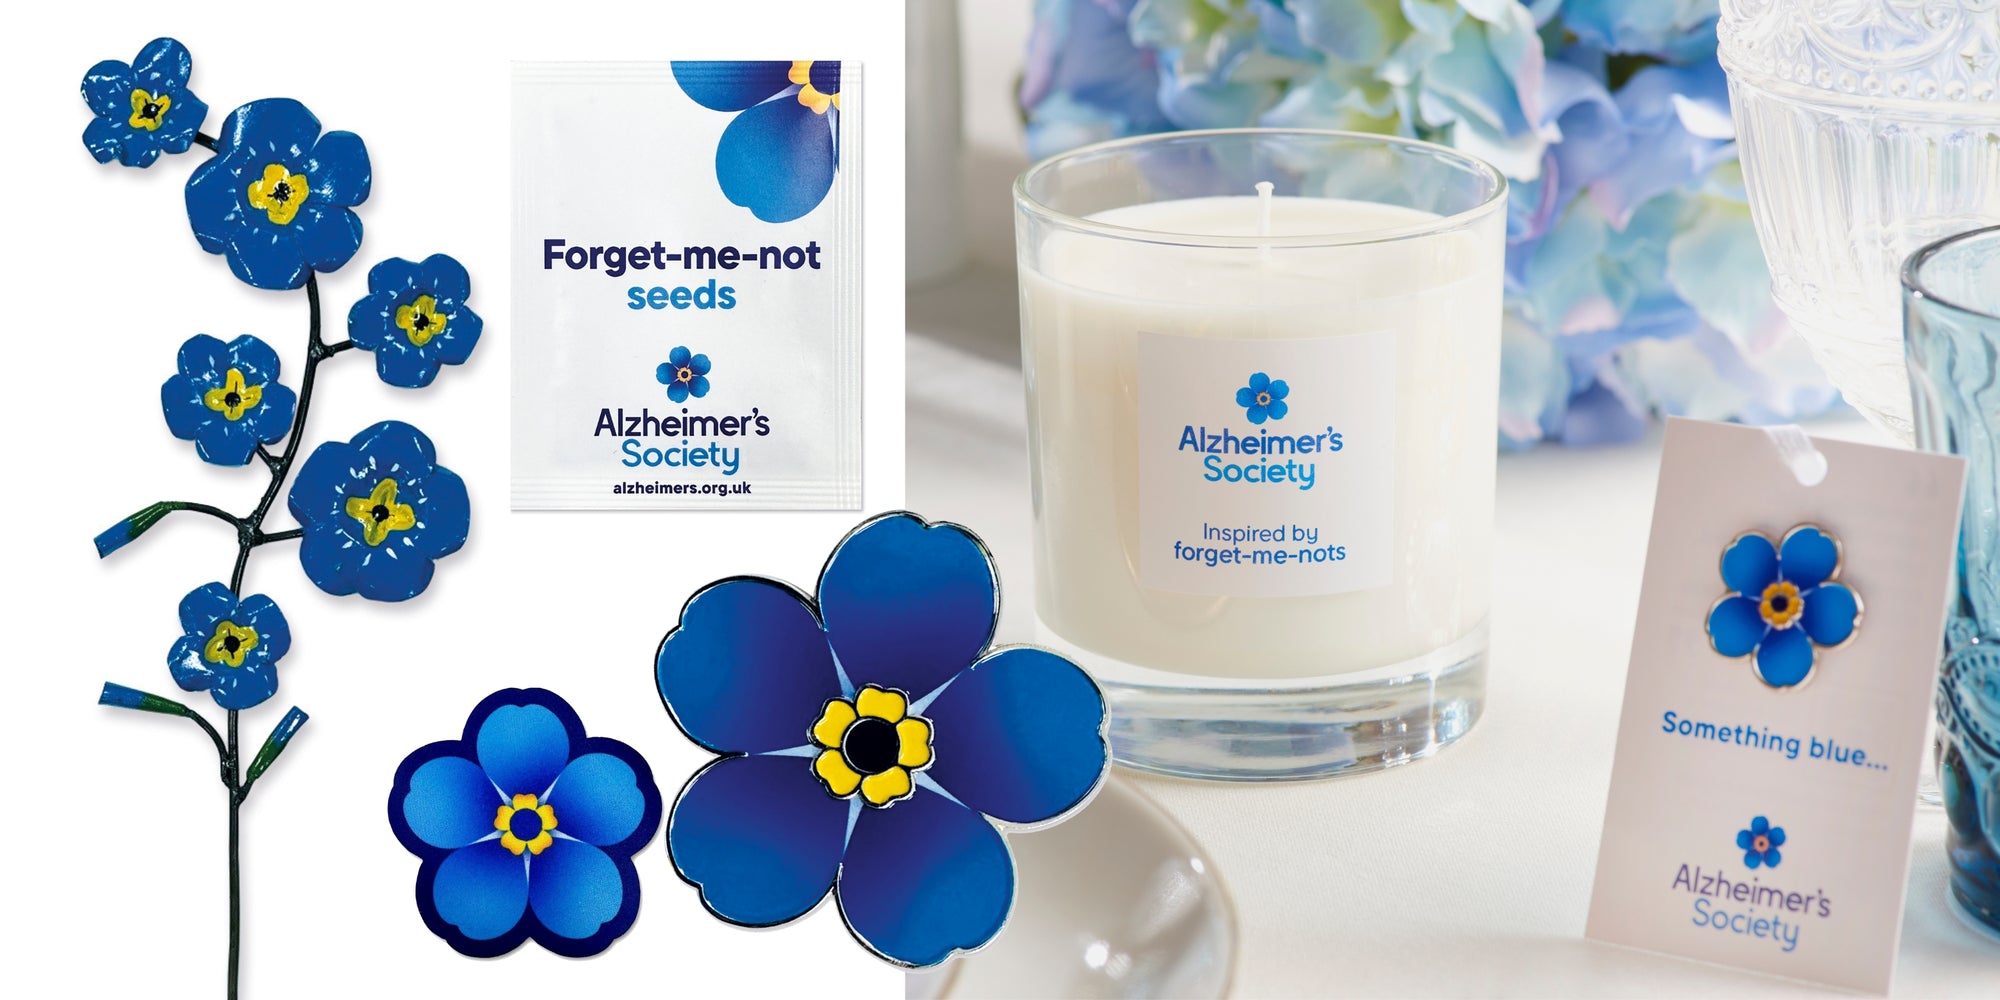 A range of forget-me-not products including an enamel and iron-on blue badge, a candle packet of seeds and a garden sculpture.